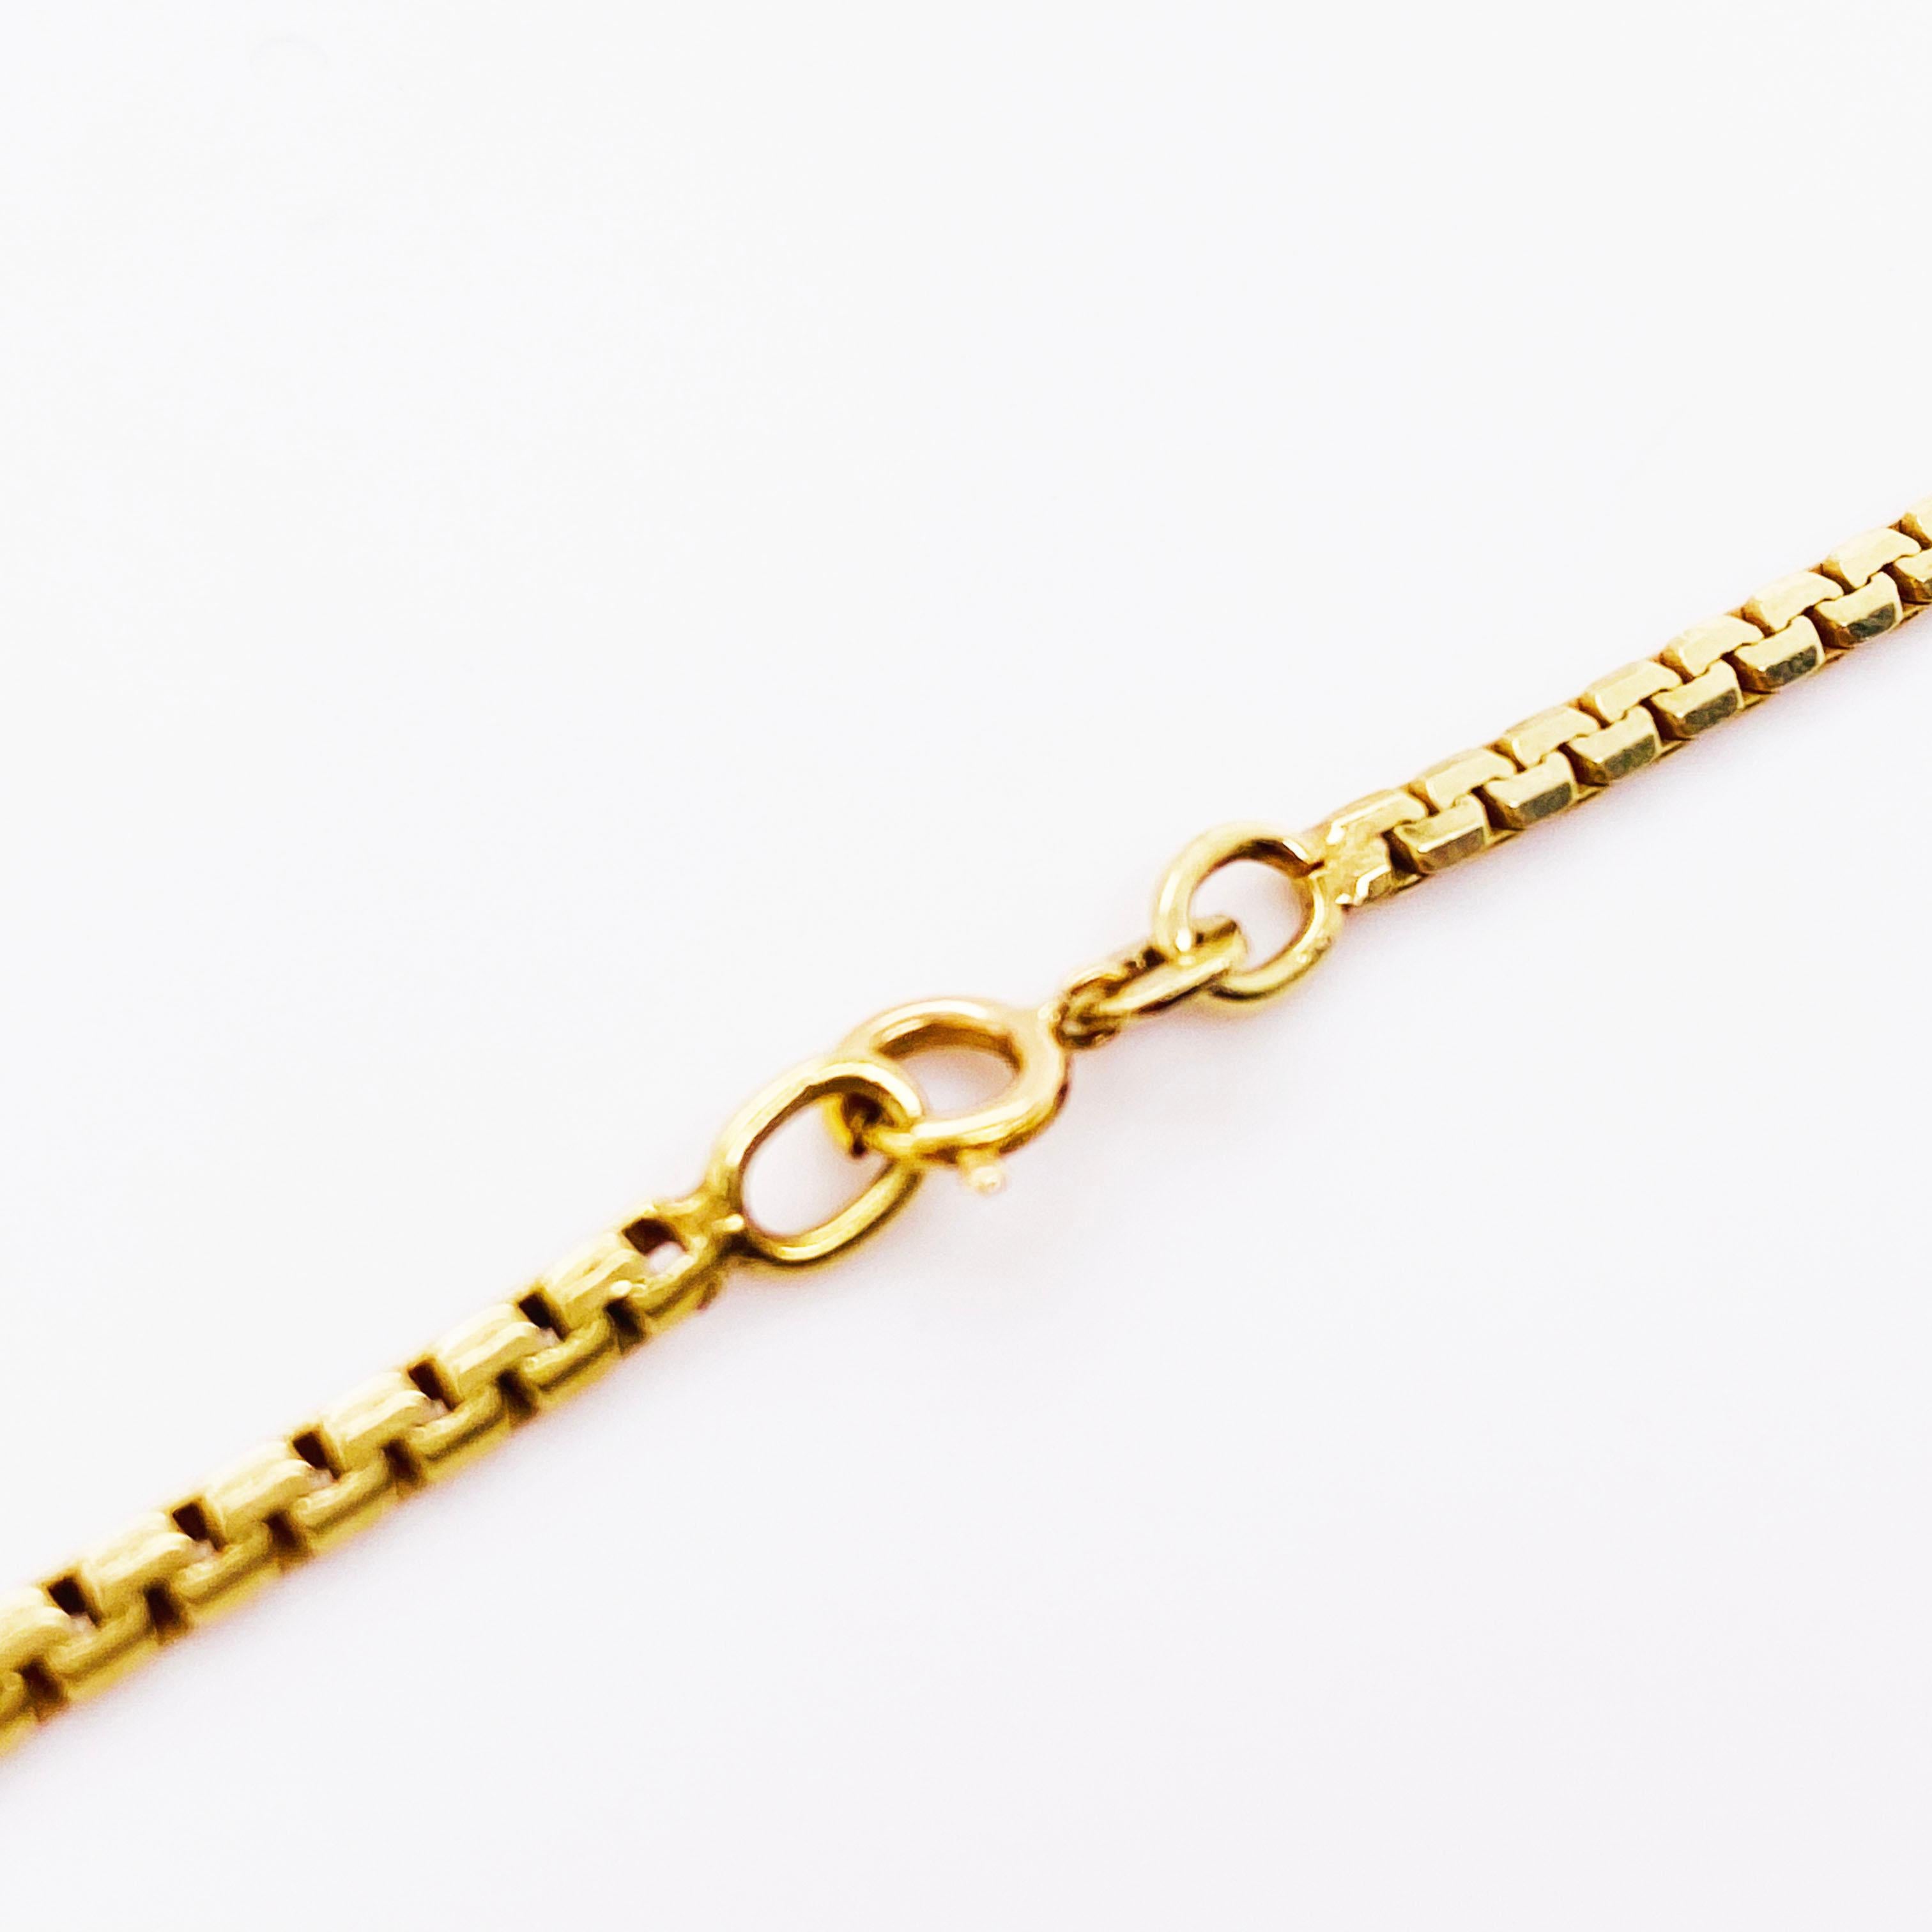 The 14 karat yellow gold zipper chain is a nice size for a man or a woman.  It is 2.6 millimeters wide and 18 inches long.  It is solid gold and weighs 12.4 grams.  There is a spring ring clasp that is also 14 karat yellow gold. 
14 karat
Spring